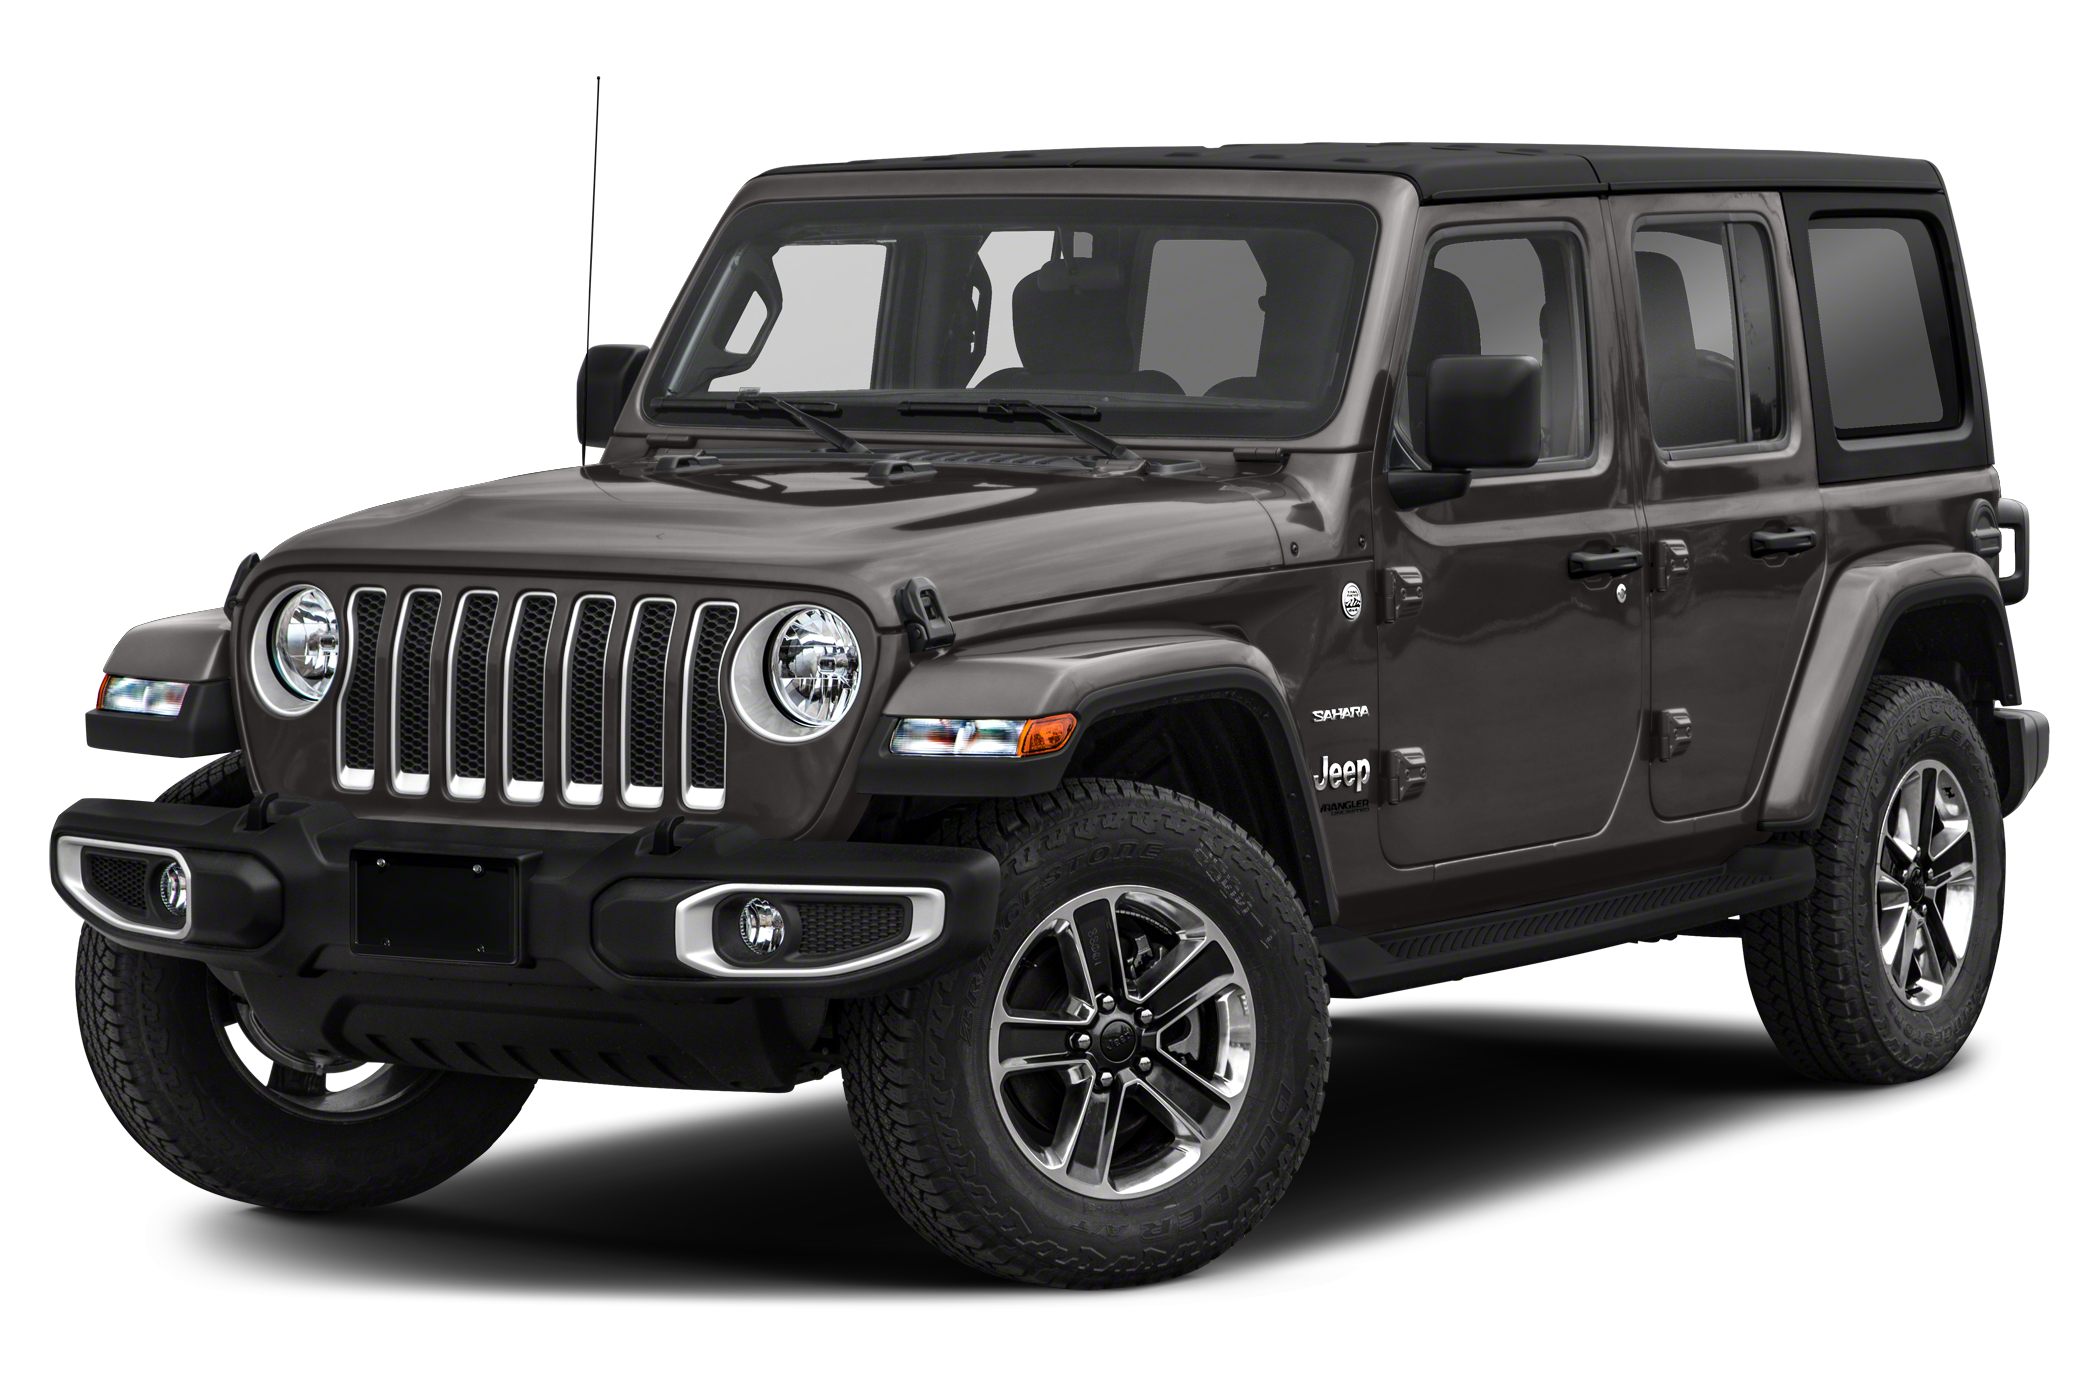 great-deals-on-a-new-2023-jeep-wrangler-sahara-4dr-4x4-at-the-autoblog